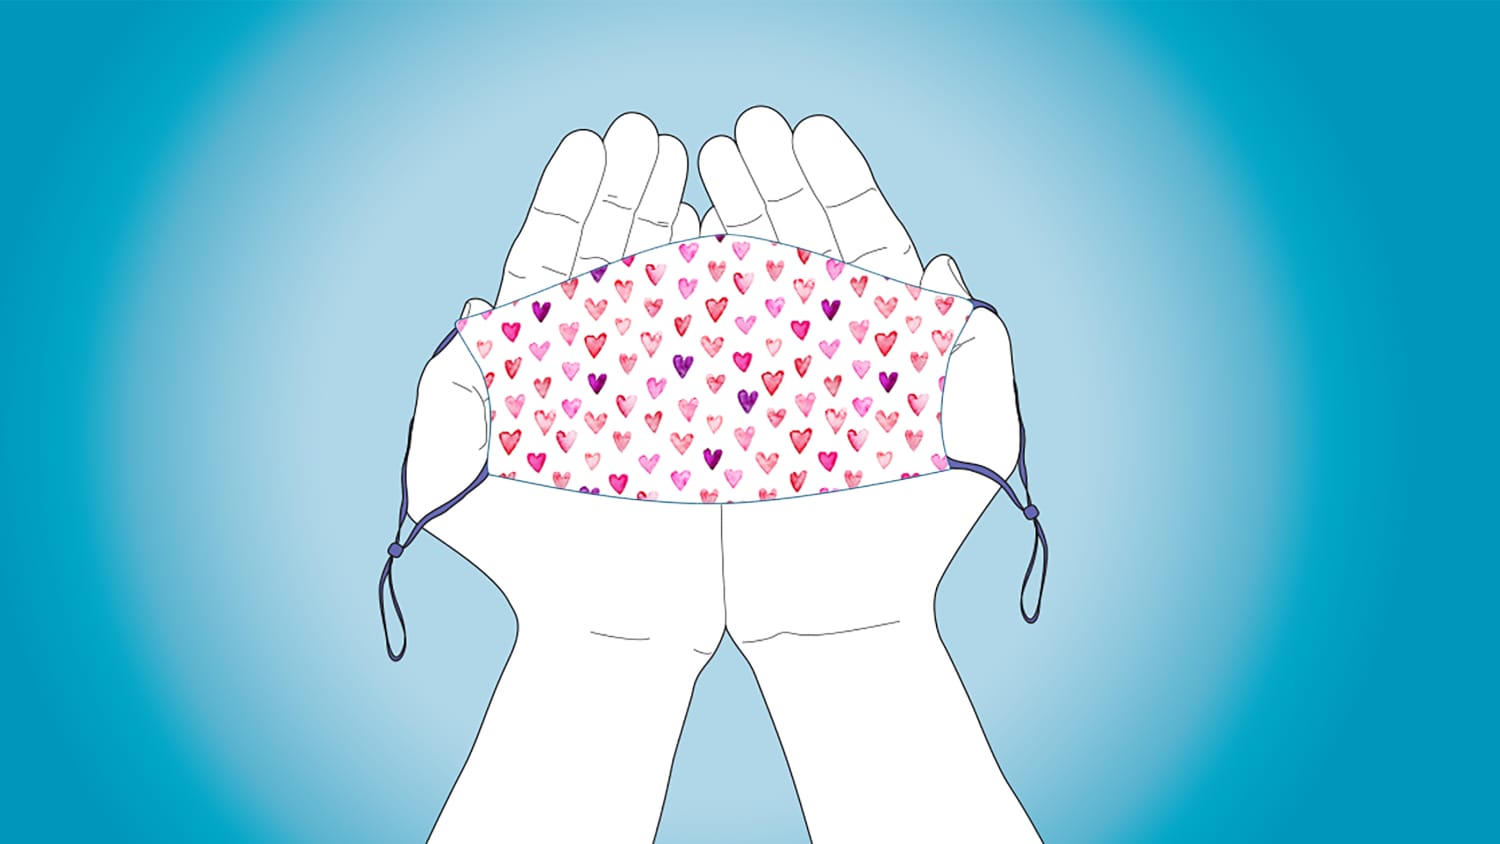 illustration of hands holding a mask with a heart pattern on it